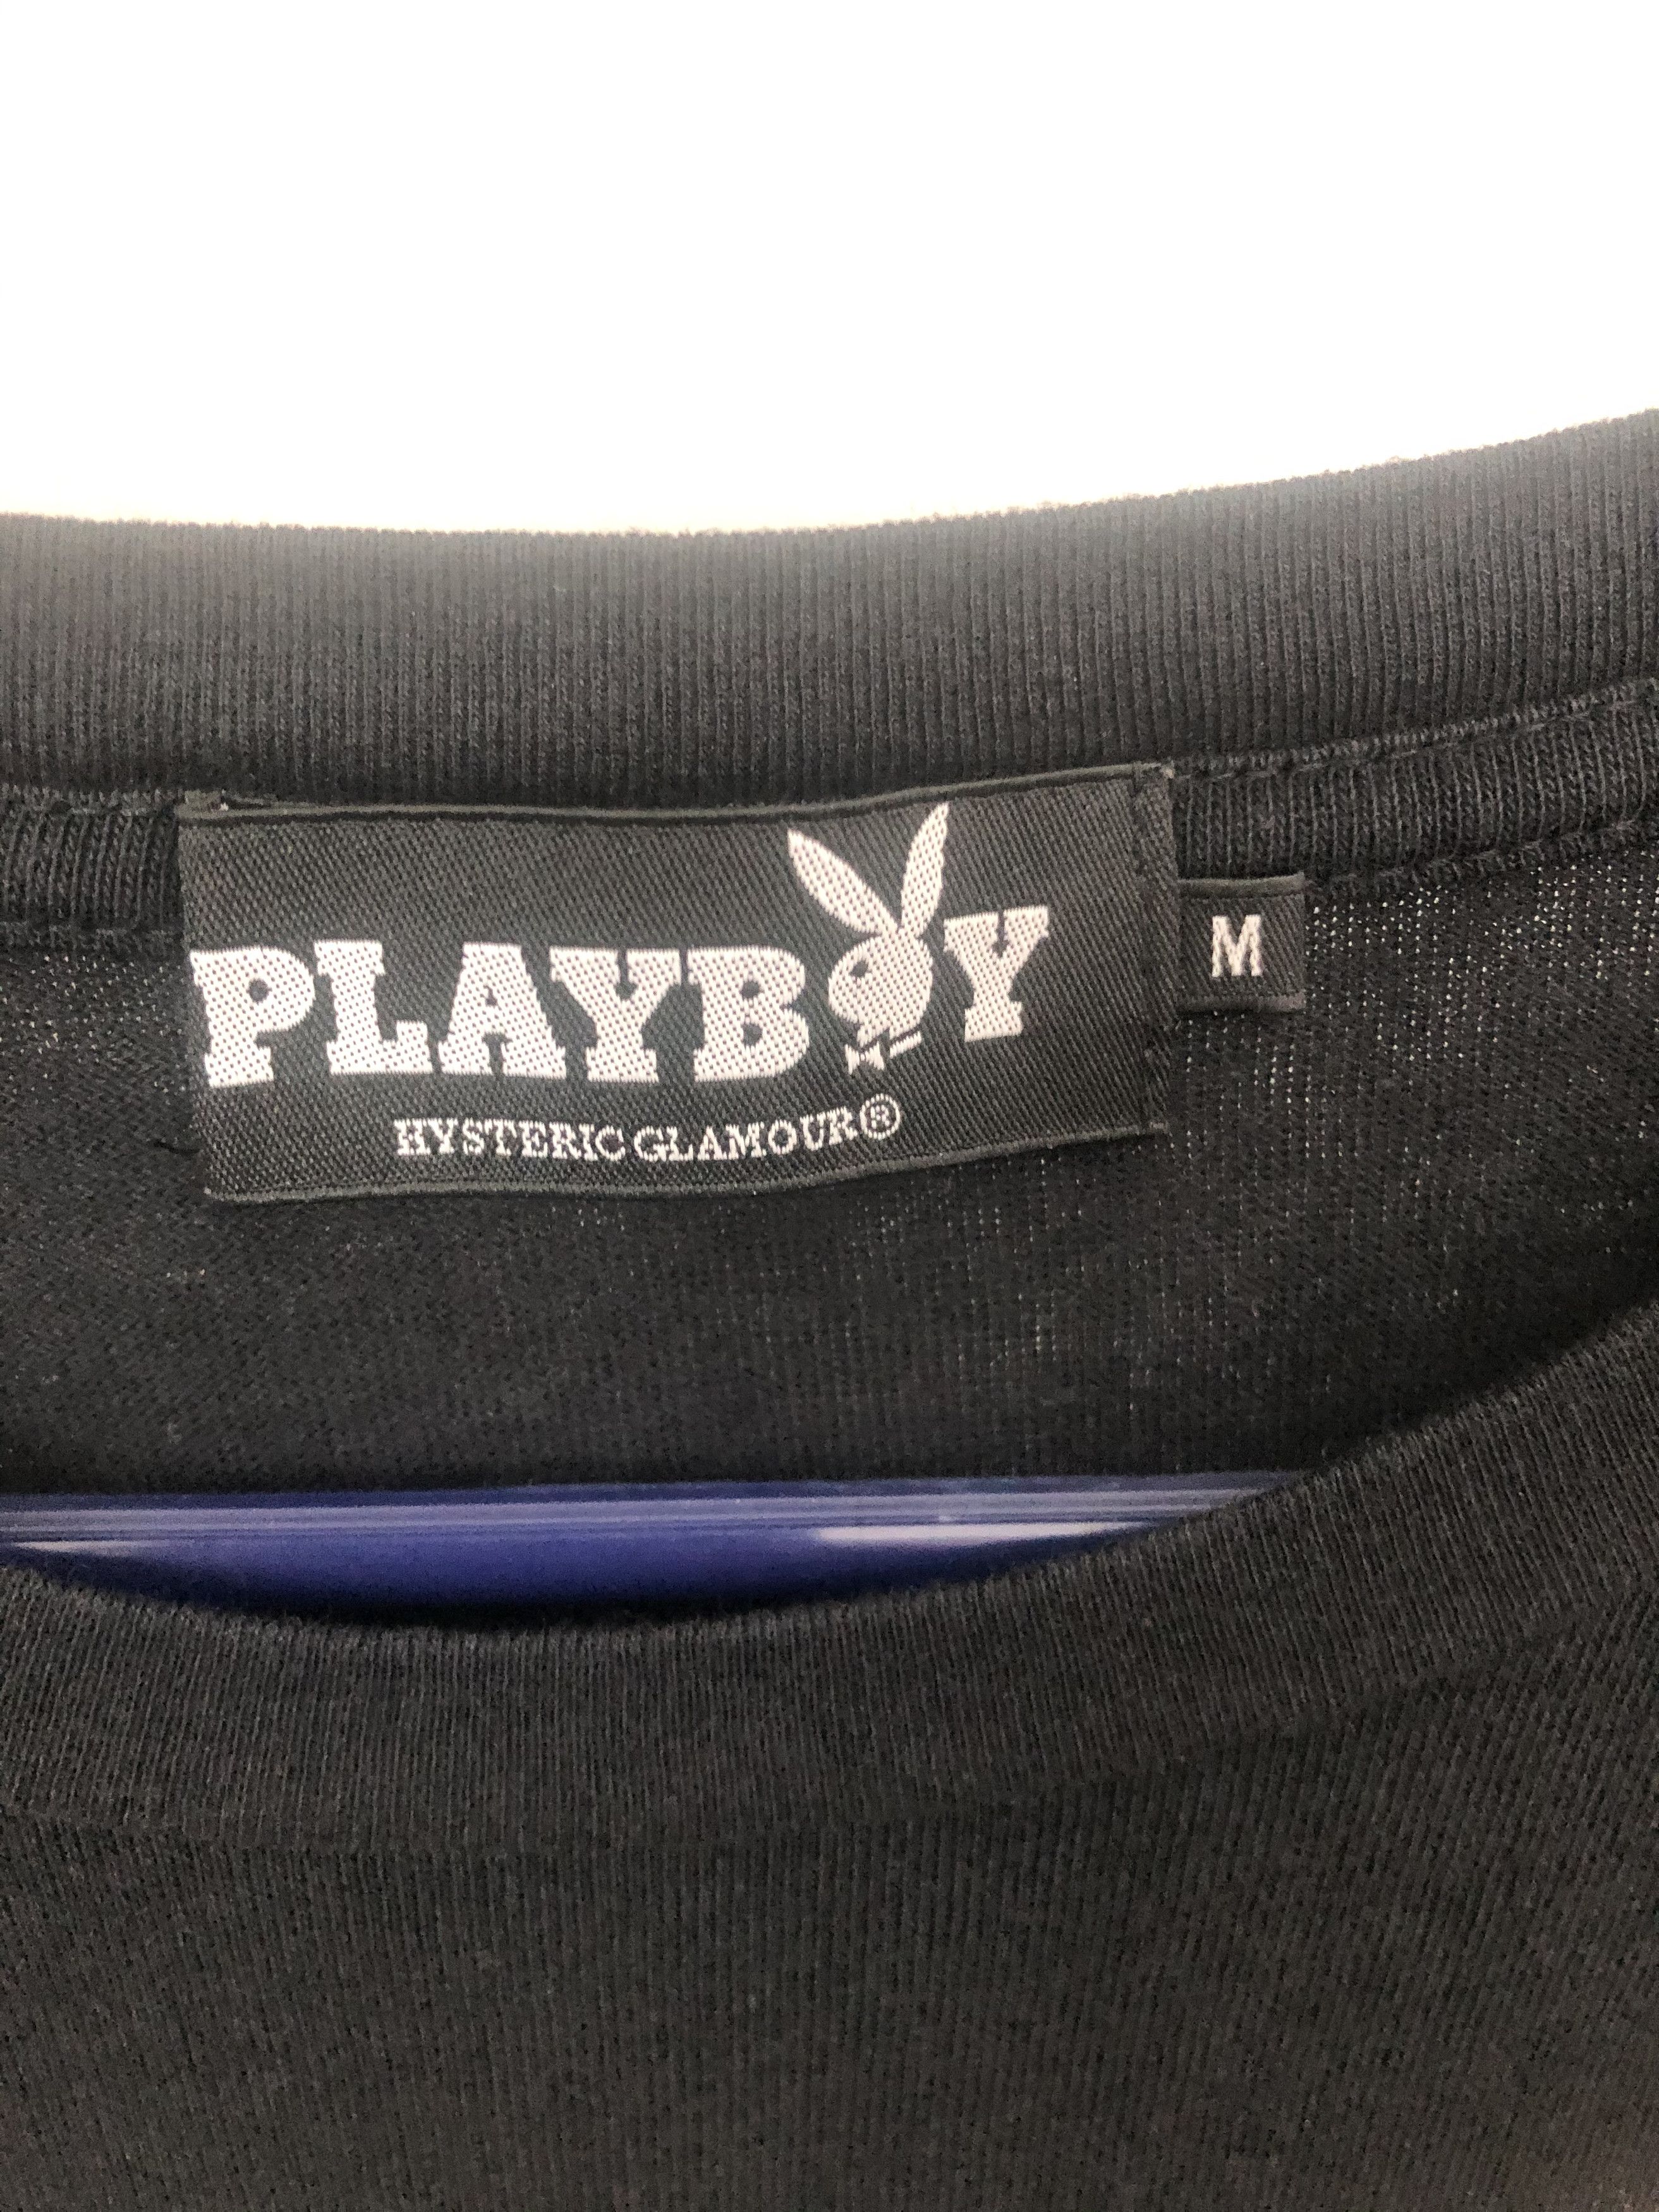 Hysteric Glamour Hysteric Glamour x Playboy T-Shirt Size US M / EU 48-50 / 2 - 2 Preview